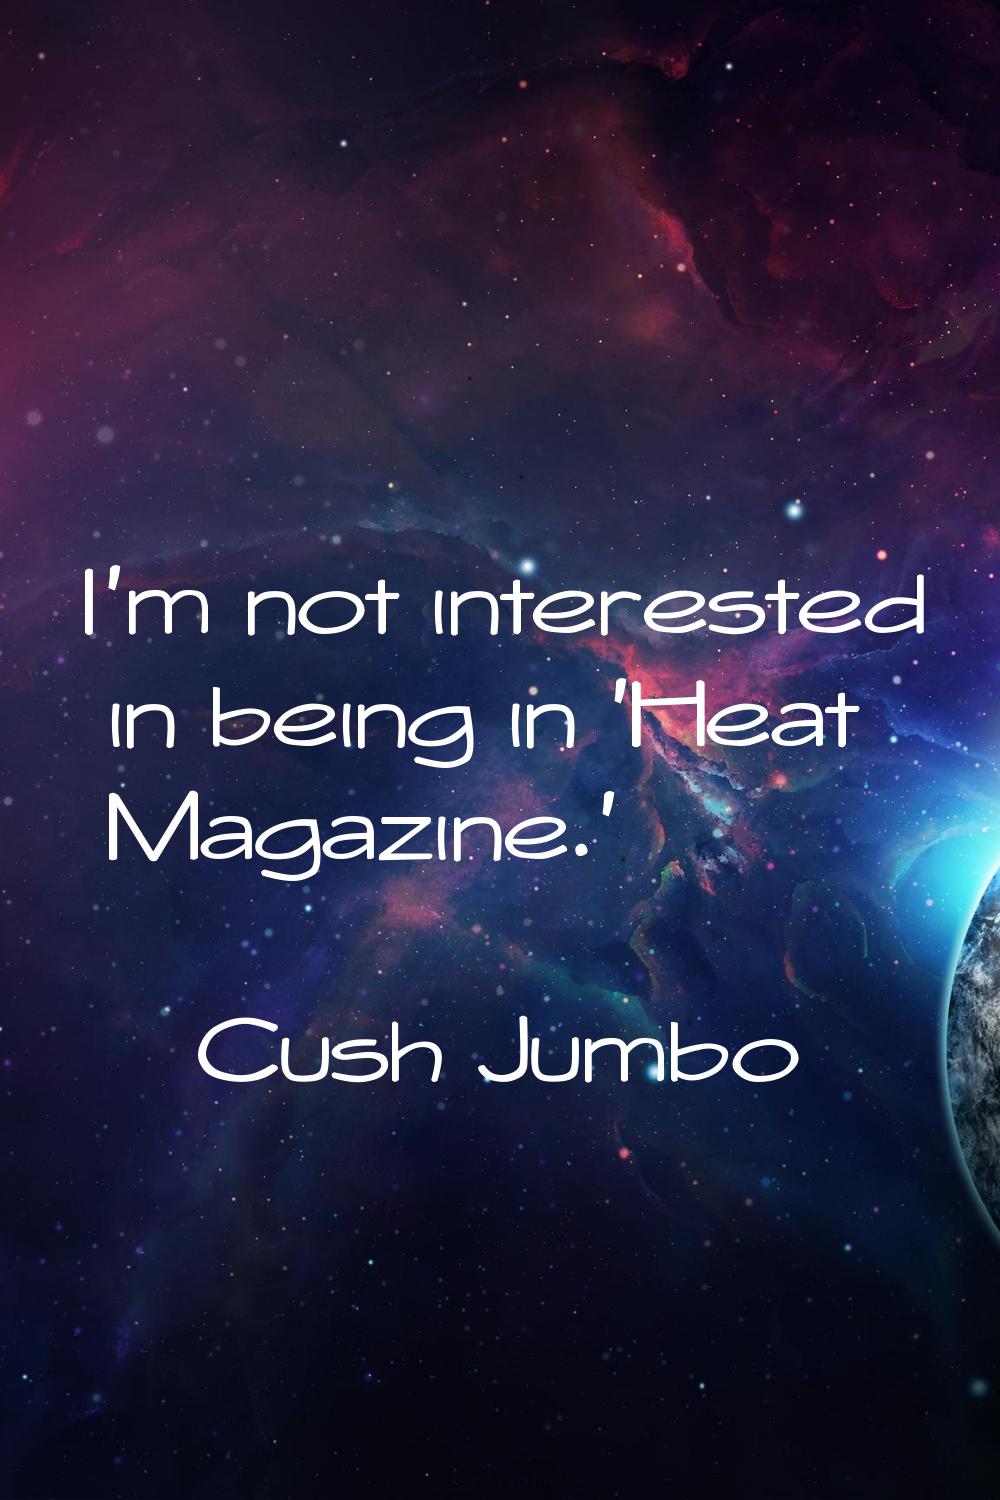 I'm not interested in being in 'Heat Magazine.'